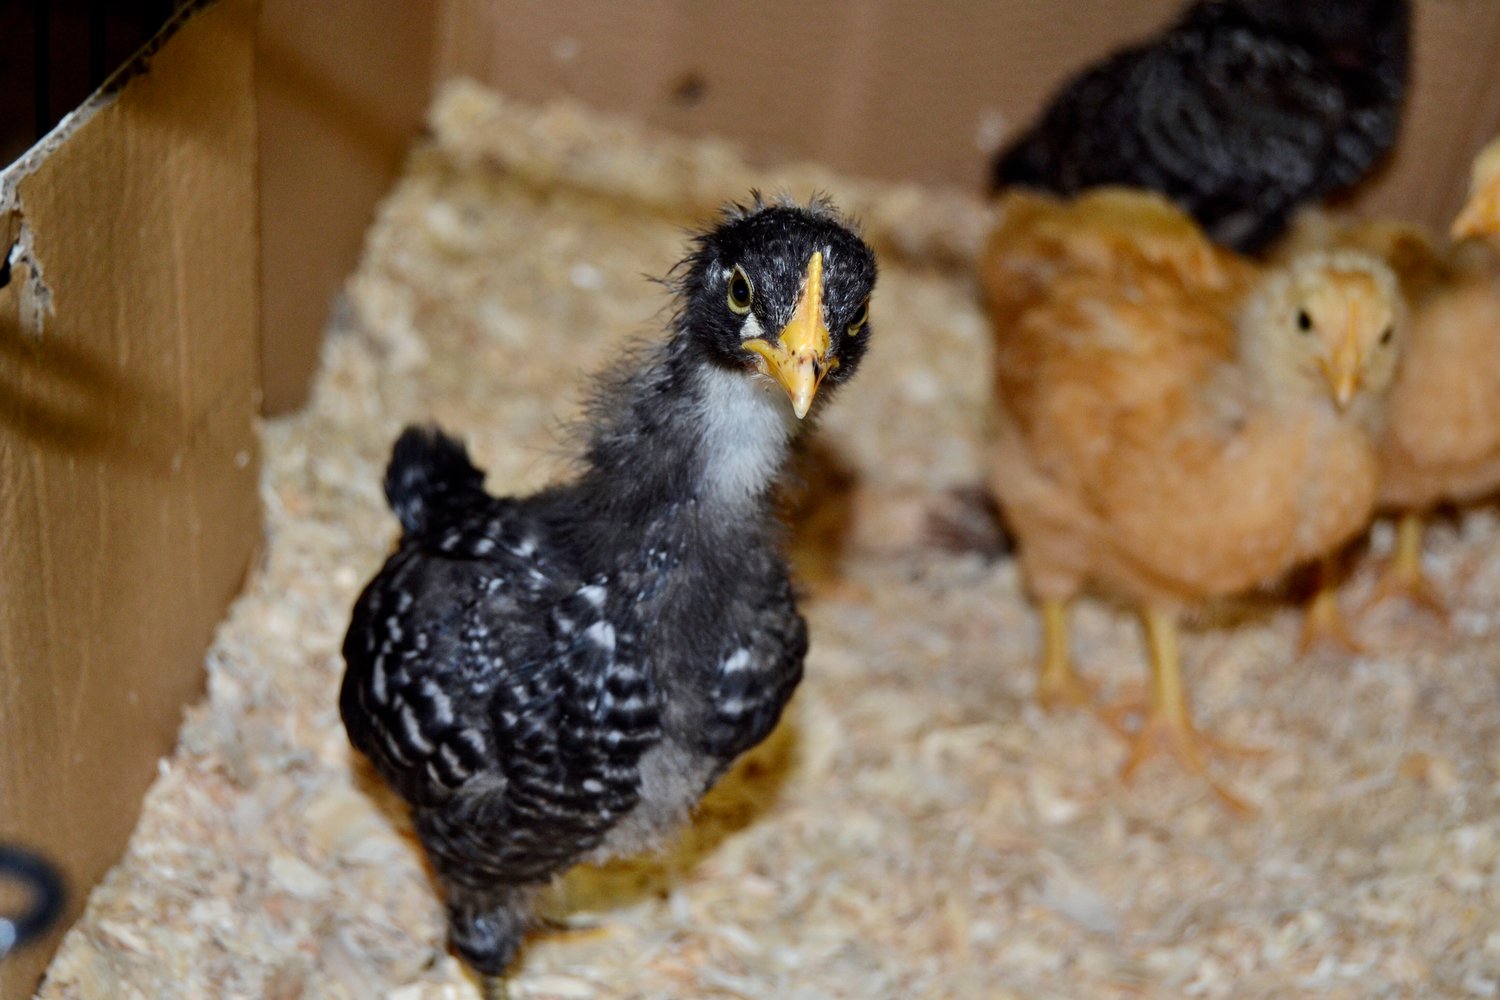 Raising Barred Rock and Buff Orpington chicks. These chicks were destined for other homesteading friends who didn’t have the space to brood their chicks.